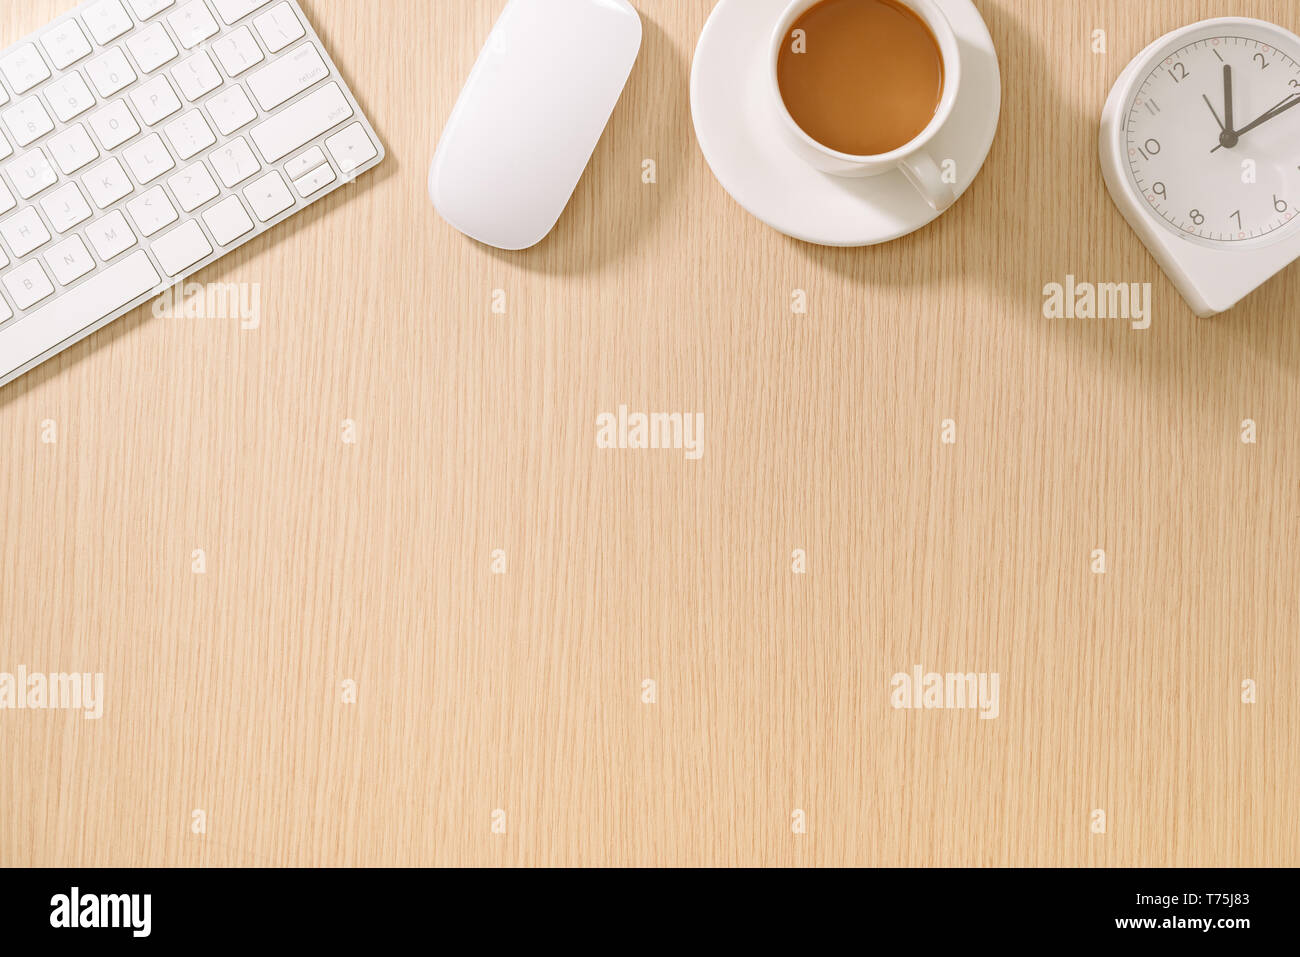 Modern white office desk with keyboard, mouse, oclock and cup of coffee.Top view with copy paste. Business and strategy concept mockup. Stock Photo